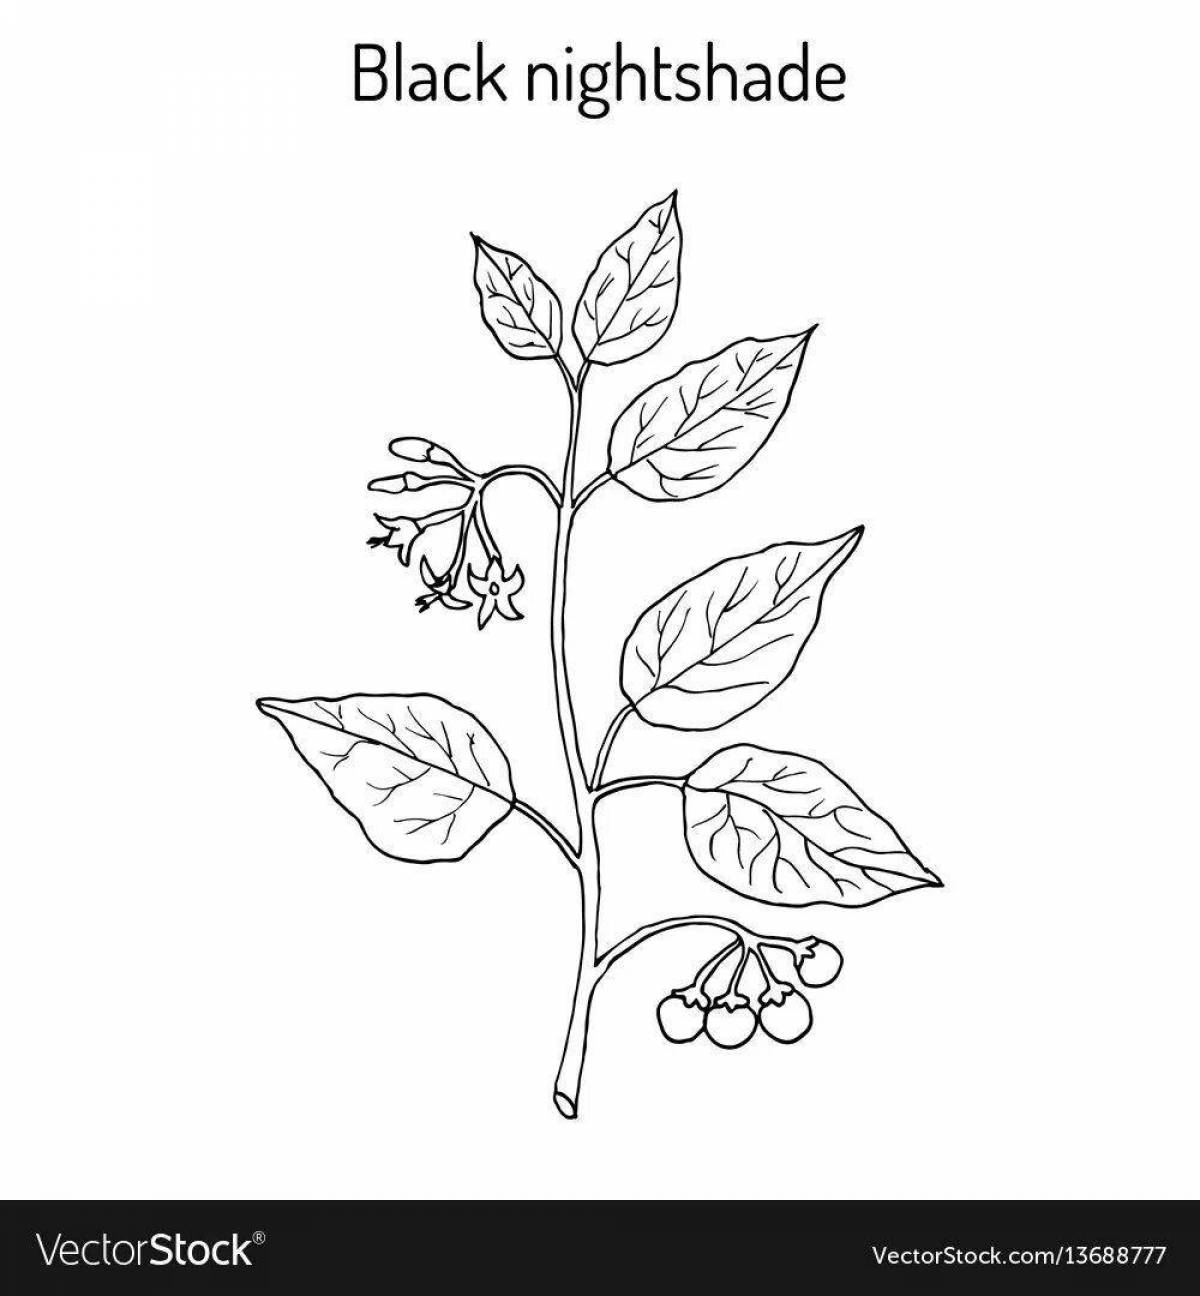 Funny poisonous plants coloring pages for kids